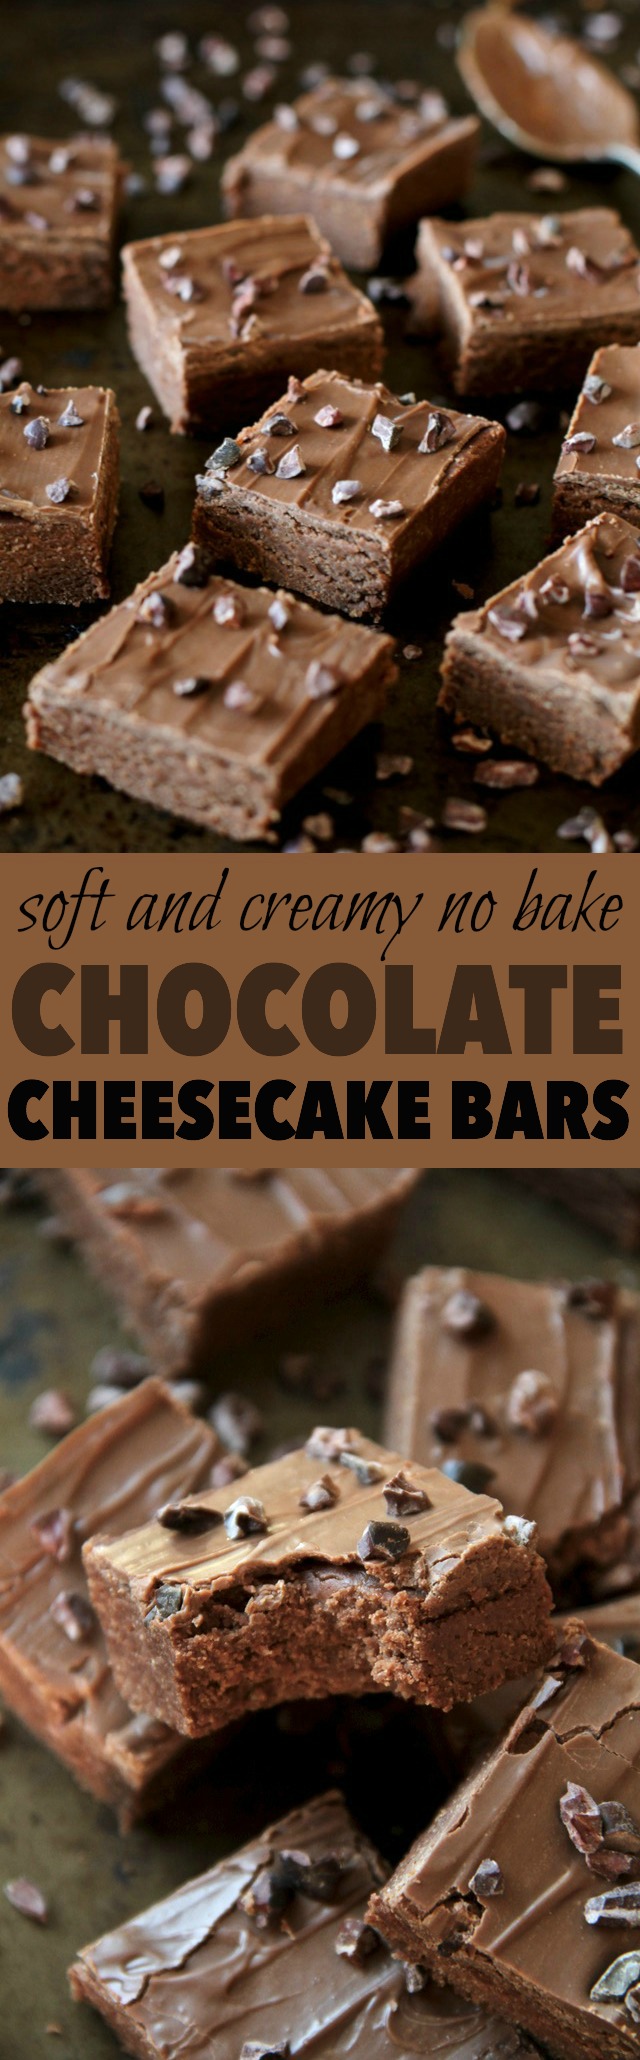 These soft and creamy No Bake Dark Chocolate Cheesecake Bars combine the subtle tanginess of cheesecake with the irresistible taste of dark chocolate. Easily made gluten-free or vegan depending on your dietary needs, they're a delicious lightened-up treat for any chocolate lover! || runnningwithspoons.com #chocolate #cheesecake #nobake